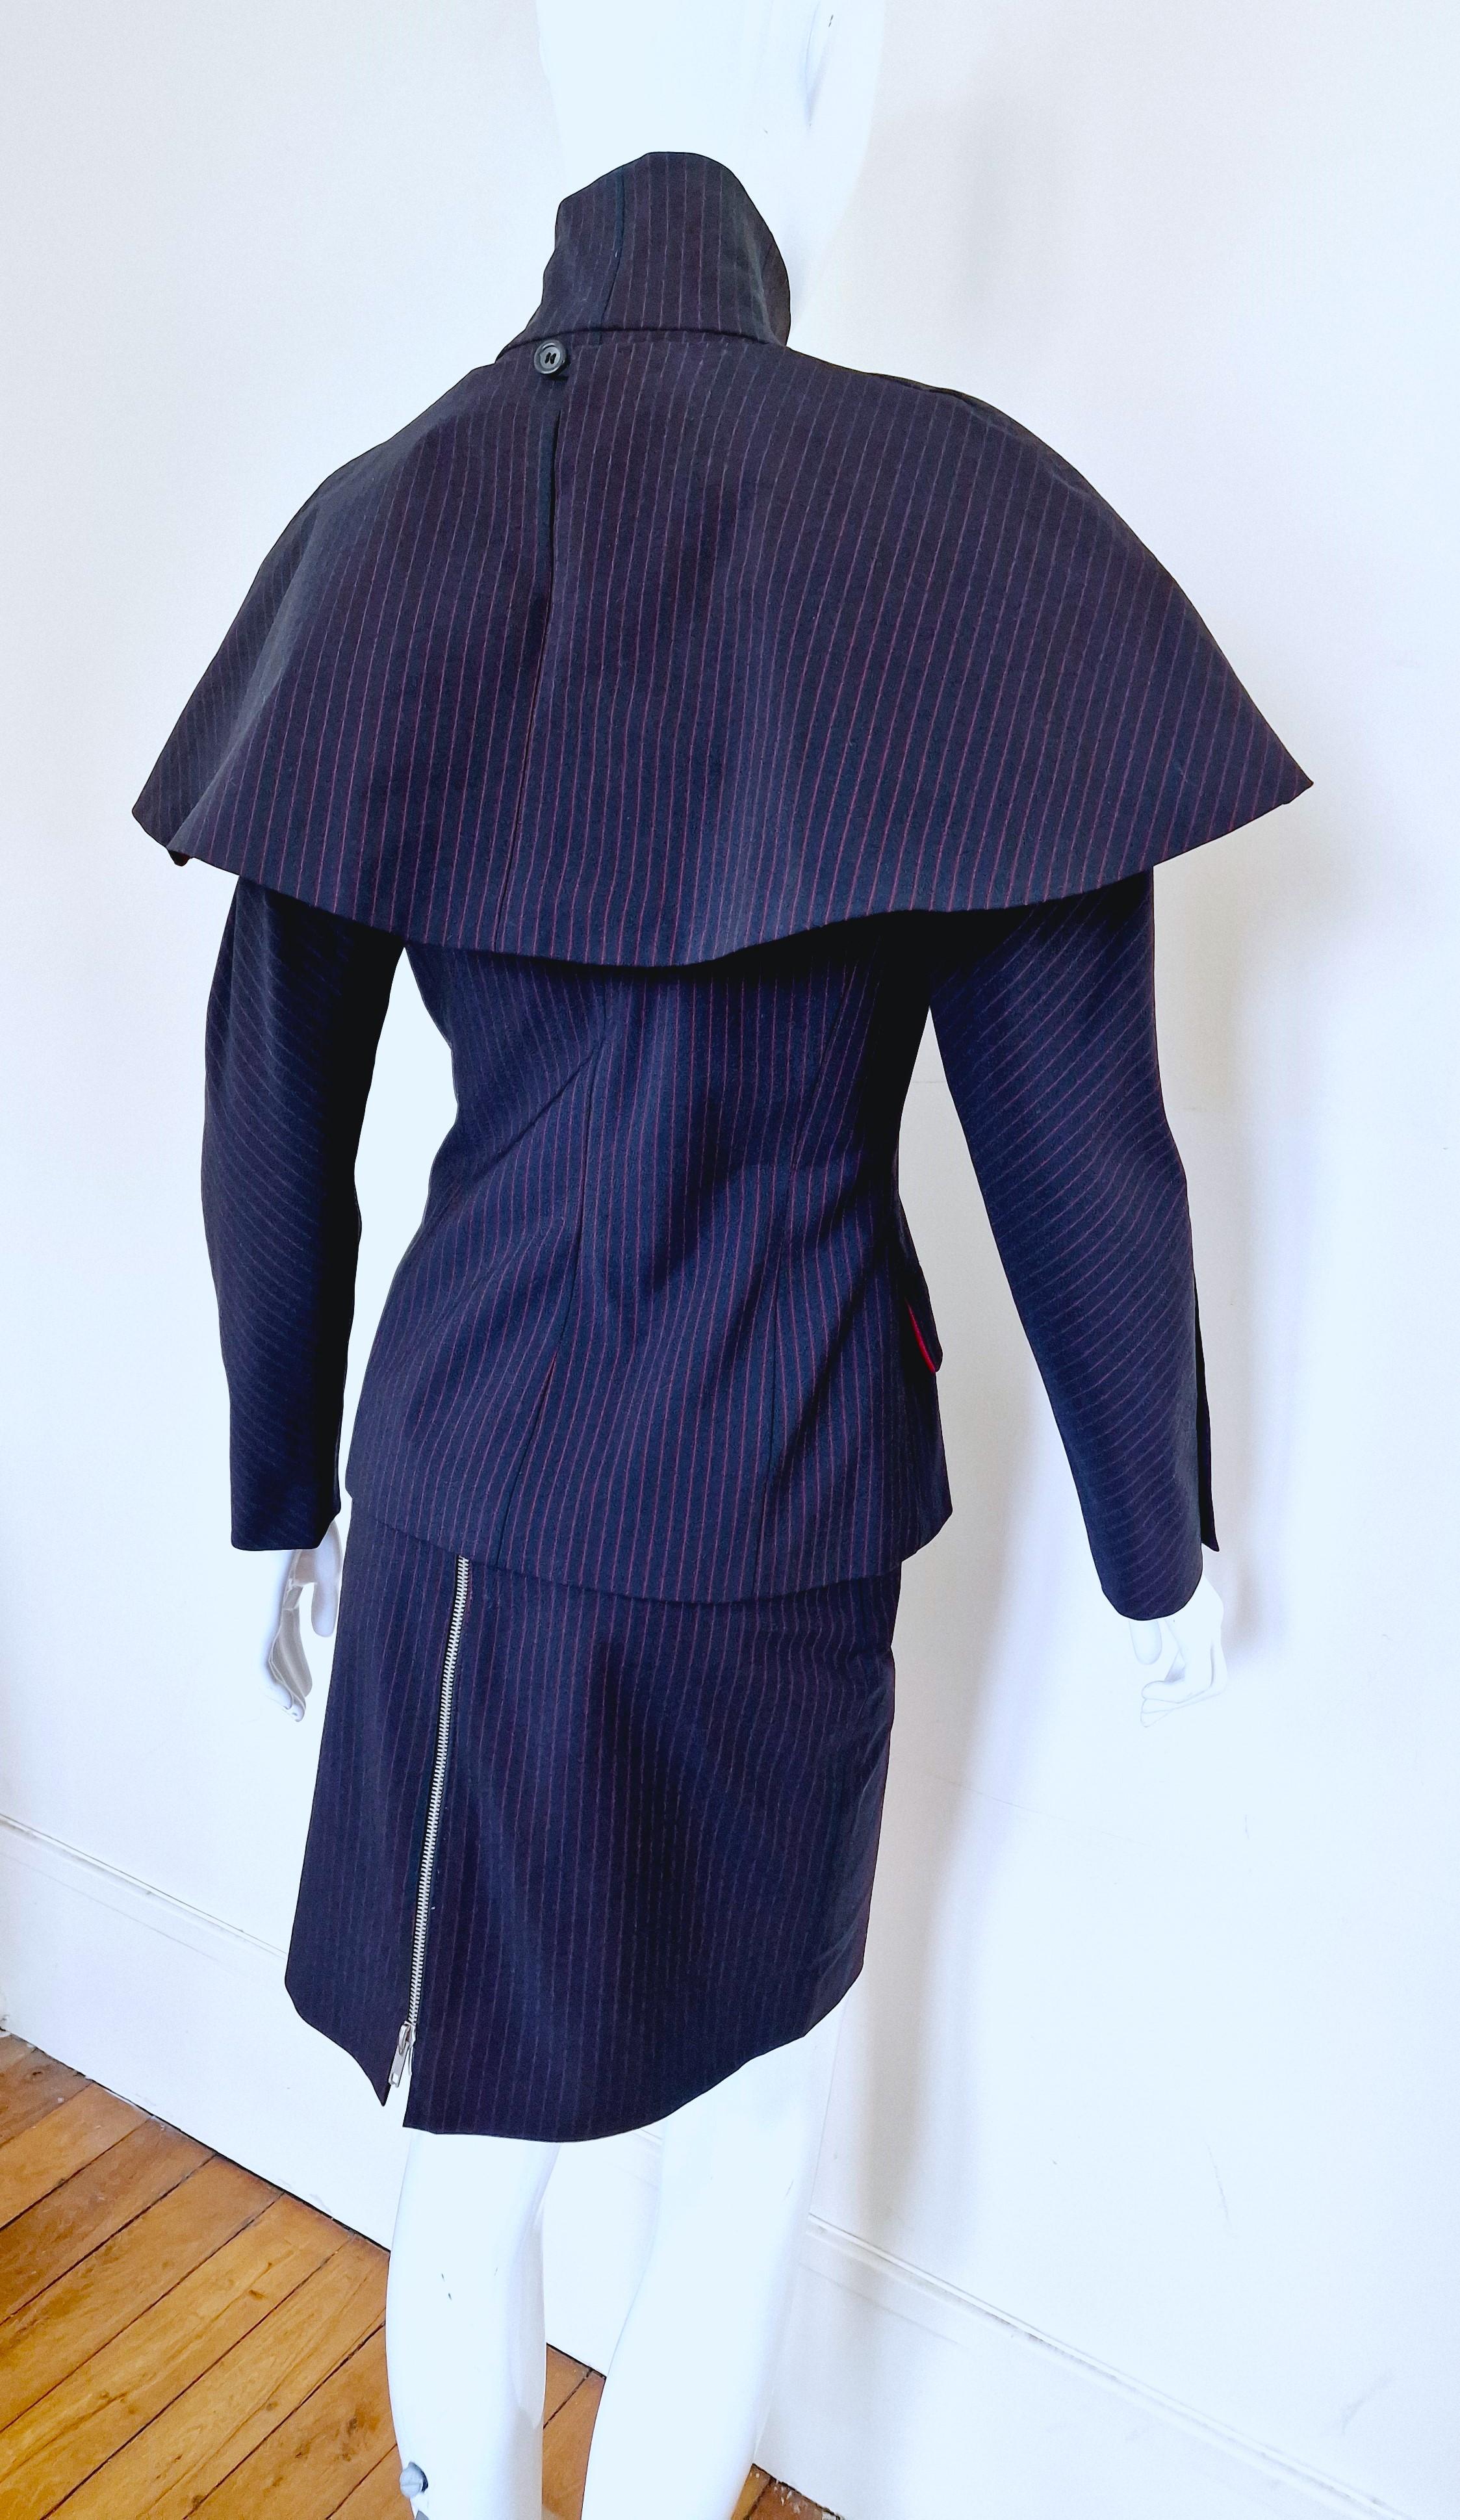 Early Alexander McQueen Joan of Arc Cape 1998 AW98 Runway Collar Dress Suit  For Sale 10